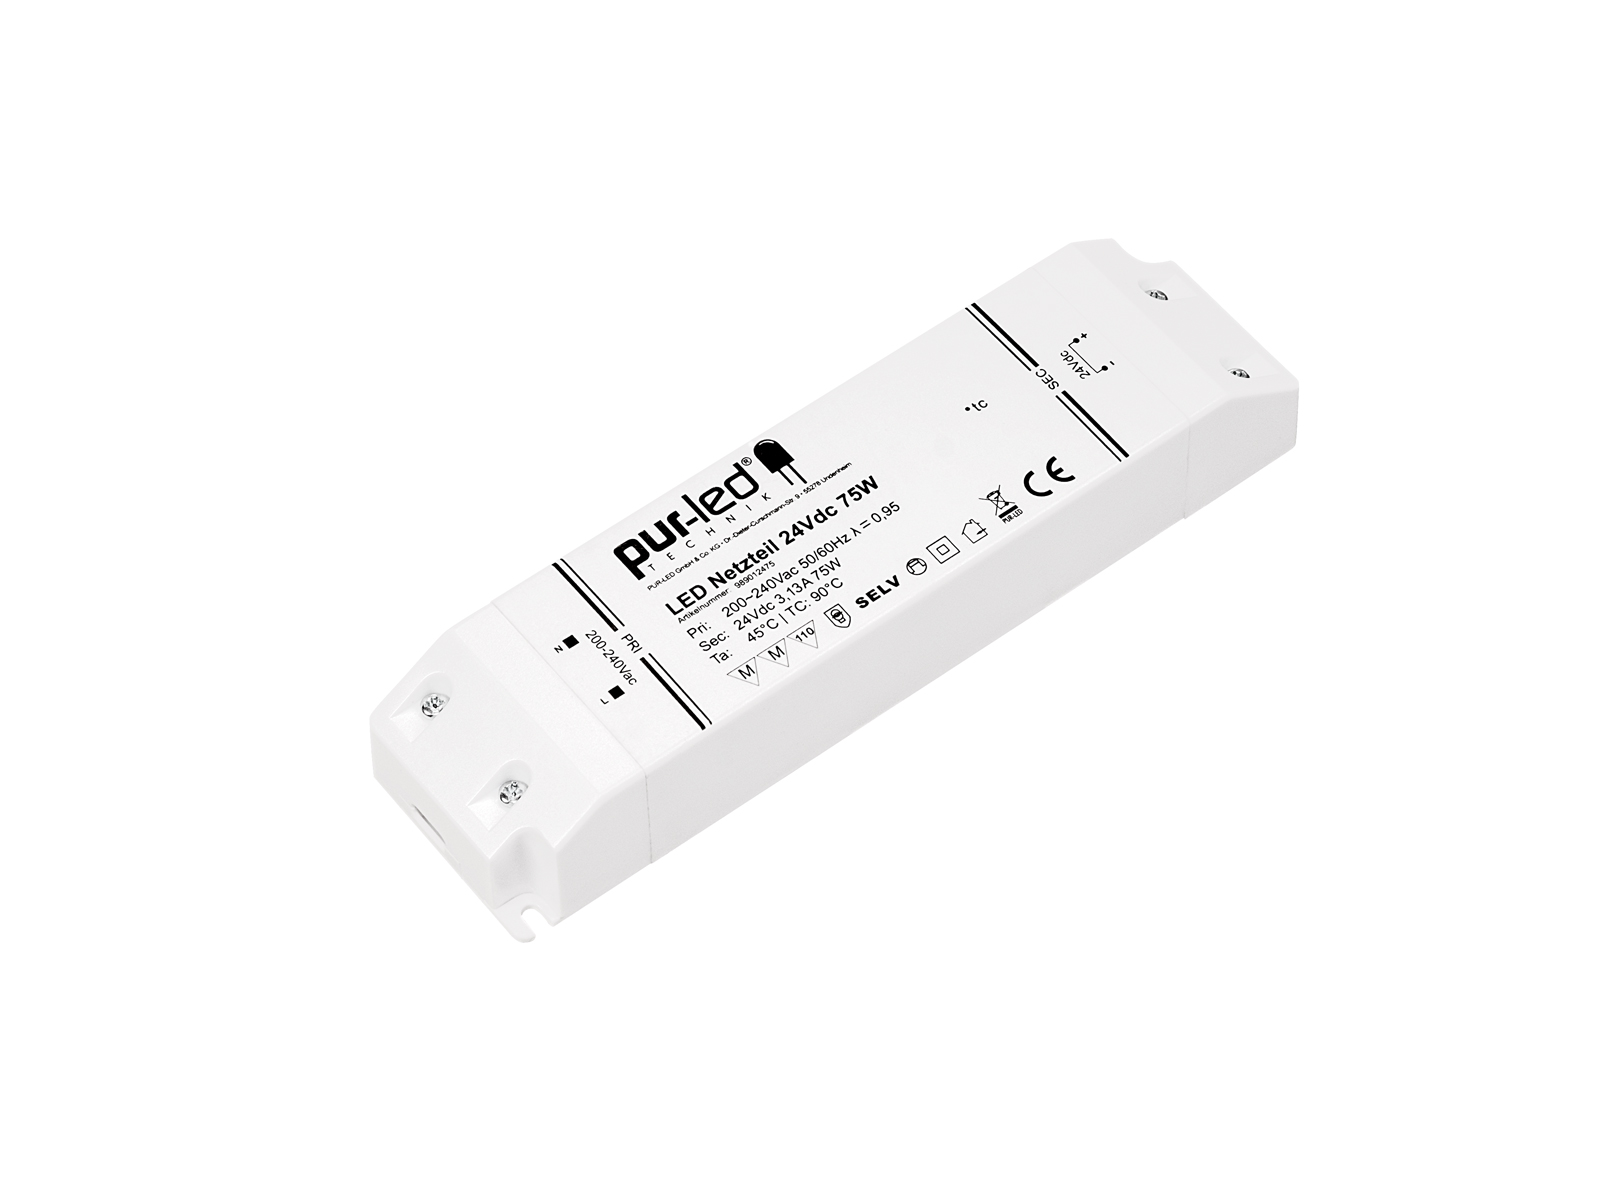 LED Netzteil 24Vdc 75W 3,1A Indoor kaufen | PUR-LED